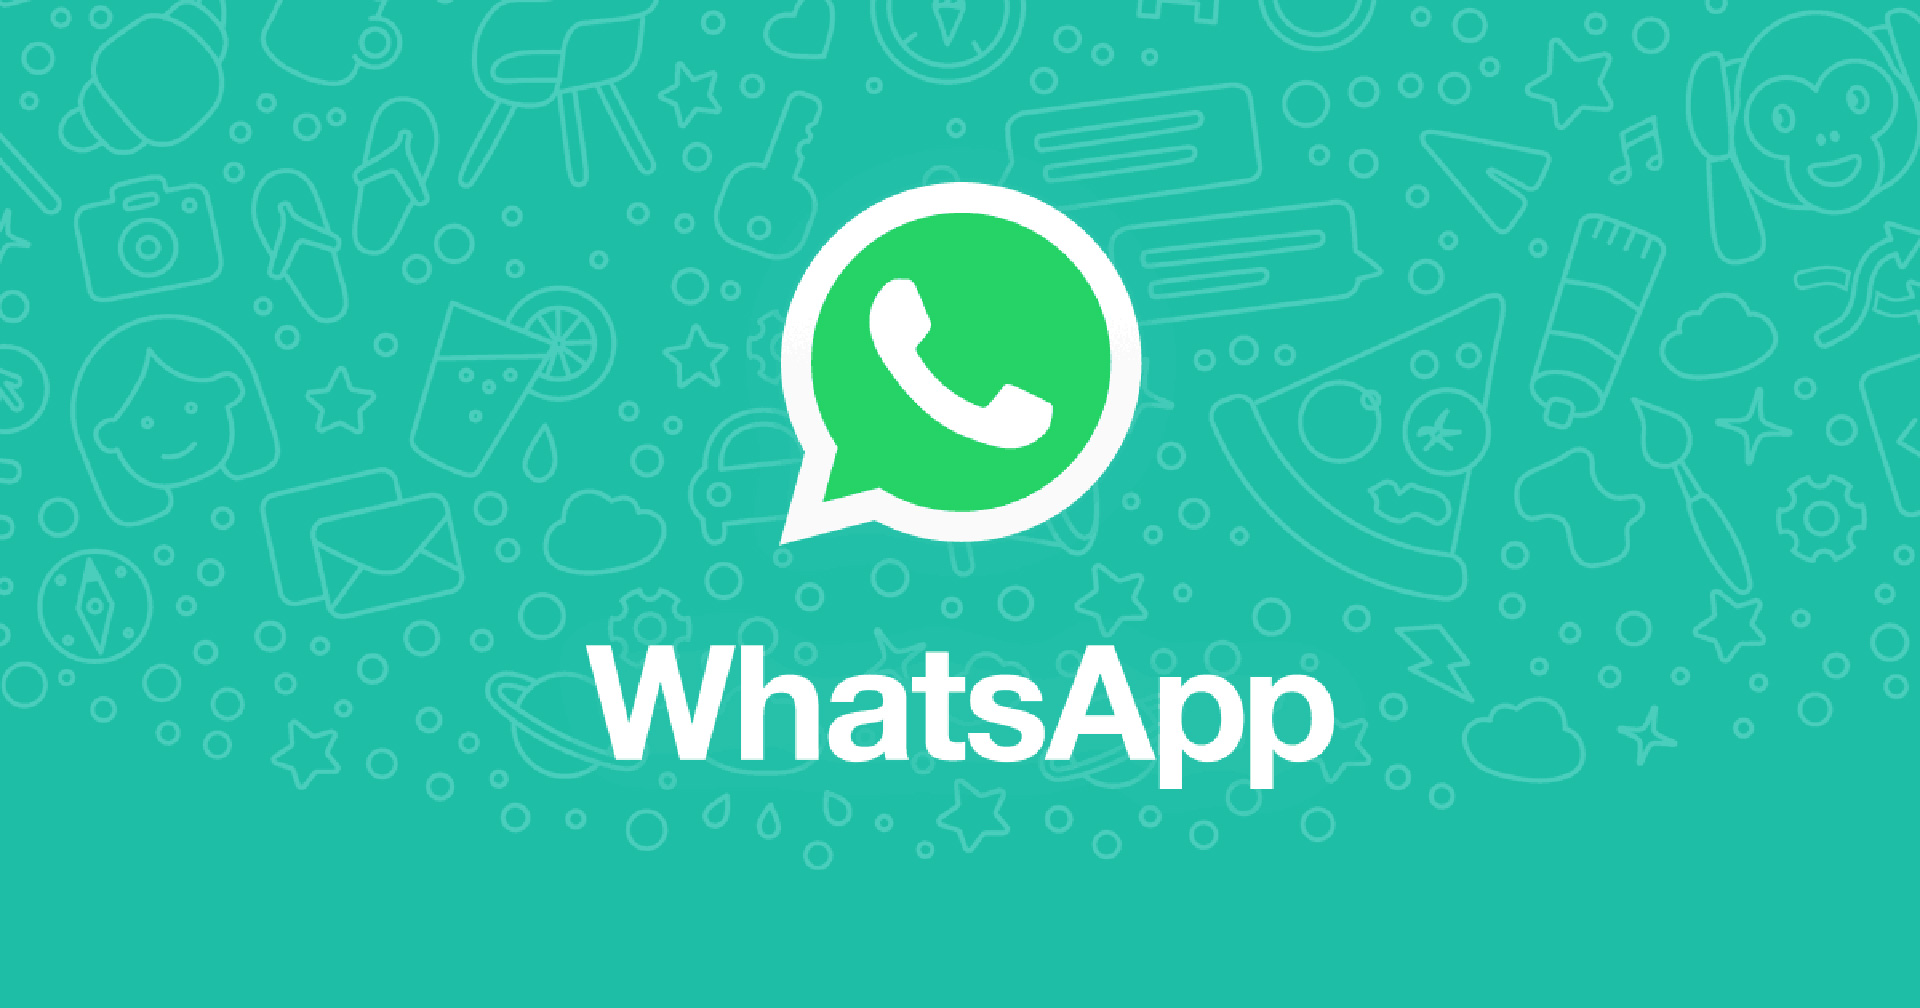 How to send live location on WhatsApp?